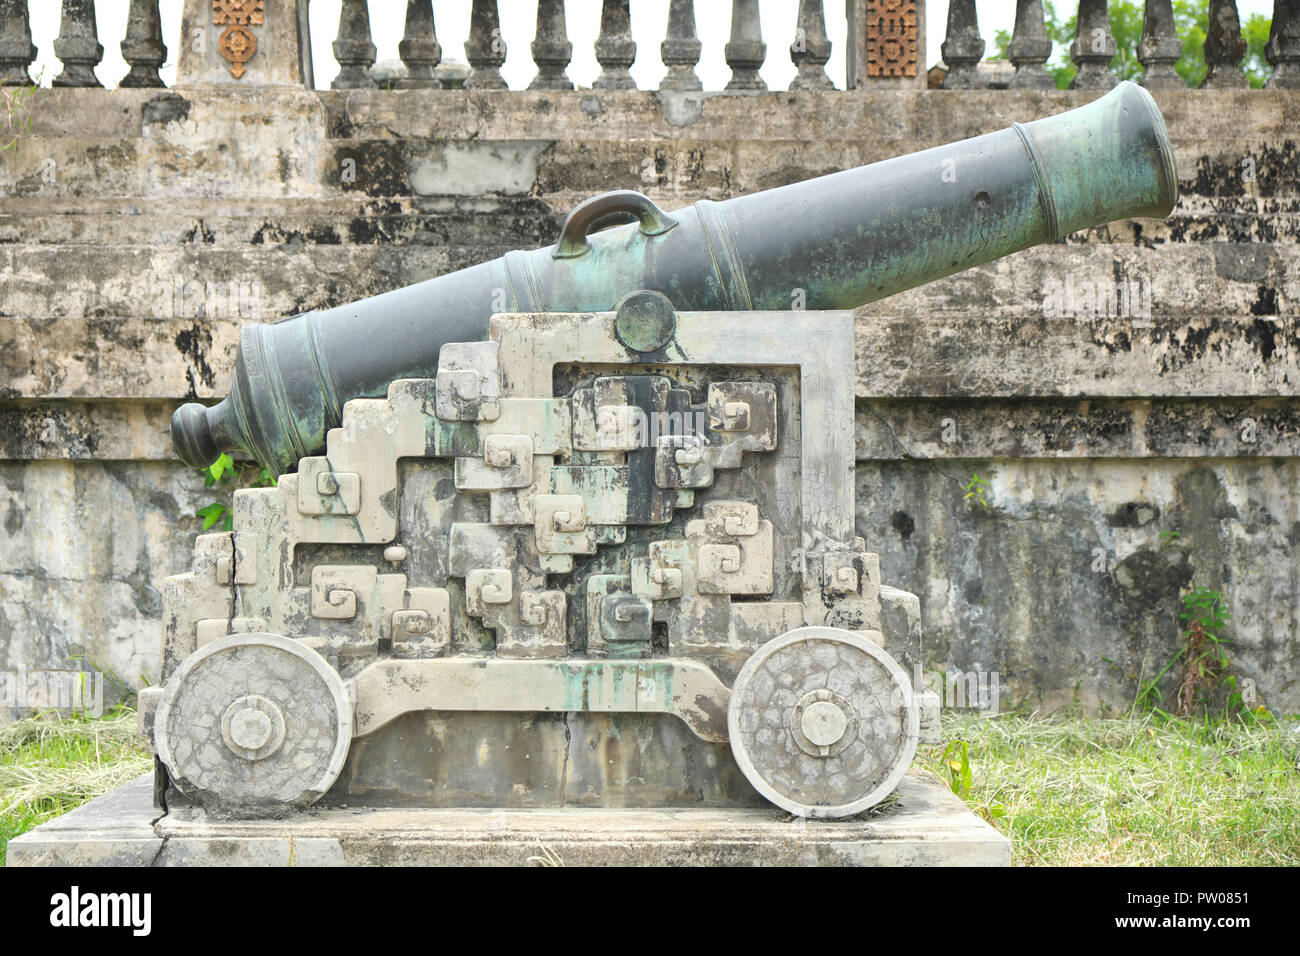 Hue Vietnam - old cannon on display within the Imperial City Stock Photo